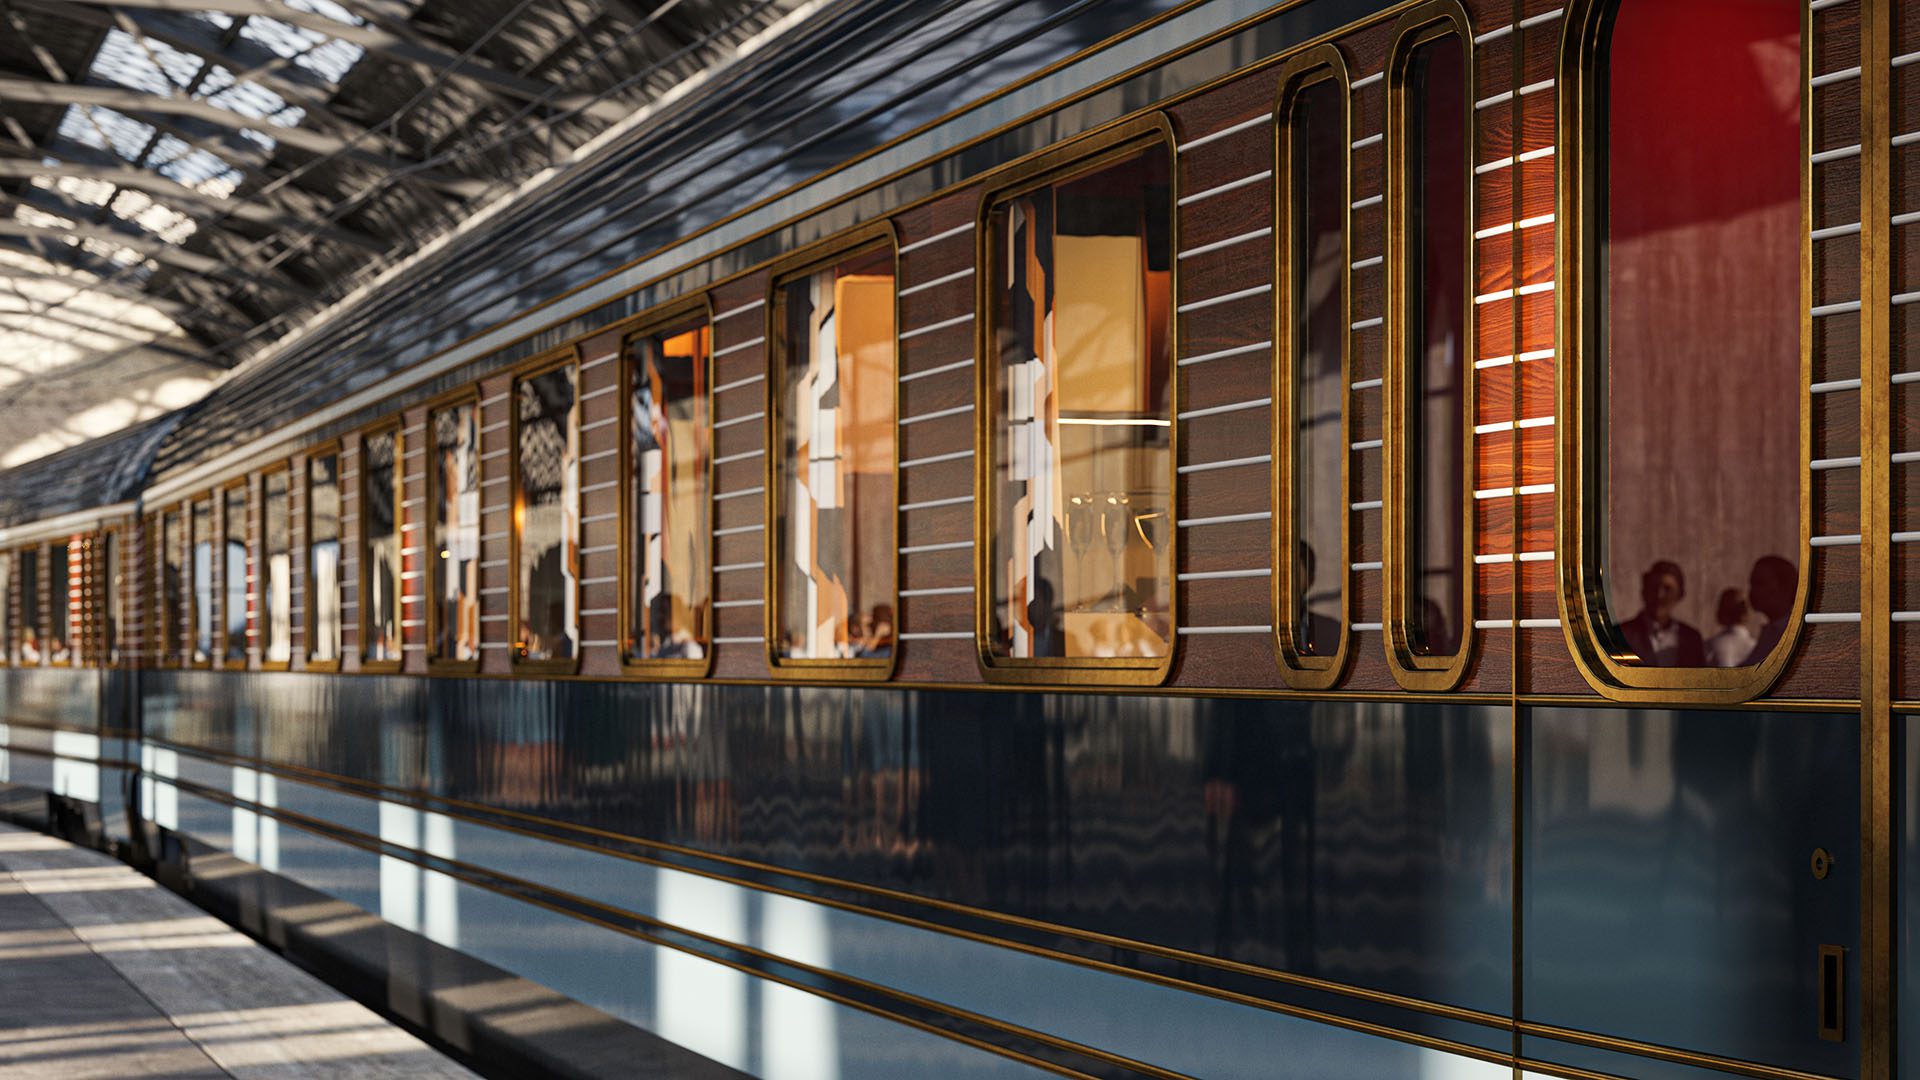 Orient Express Returns To Italy With 6 La Dolce Vita Trains